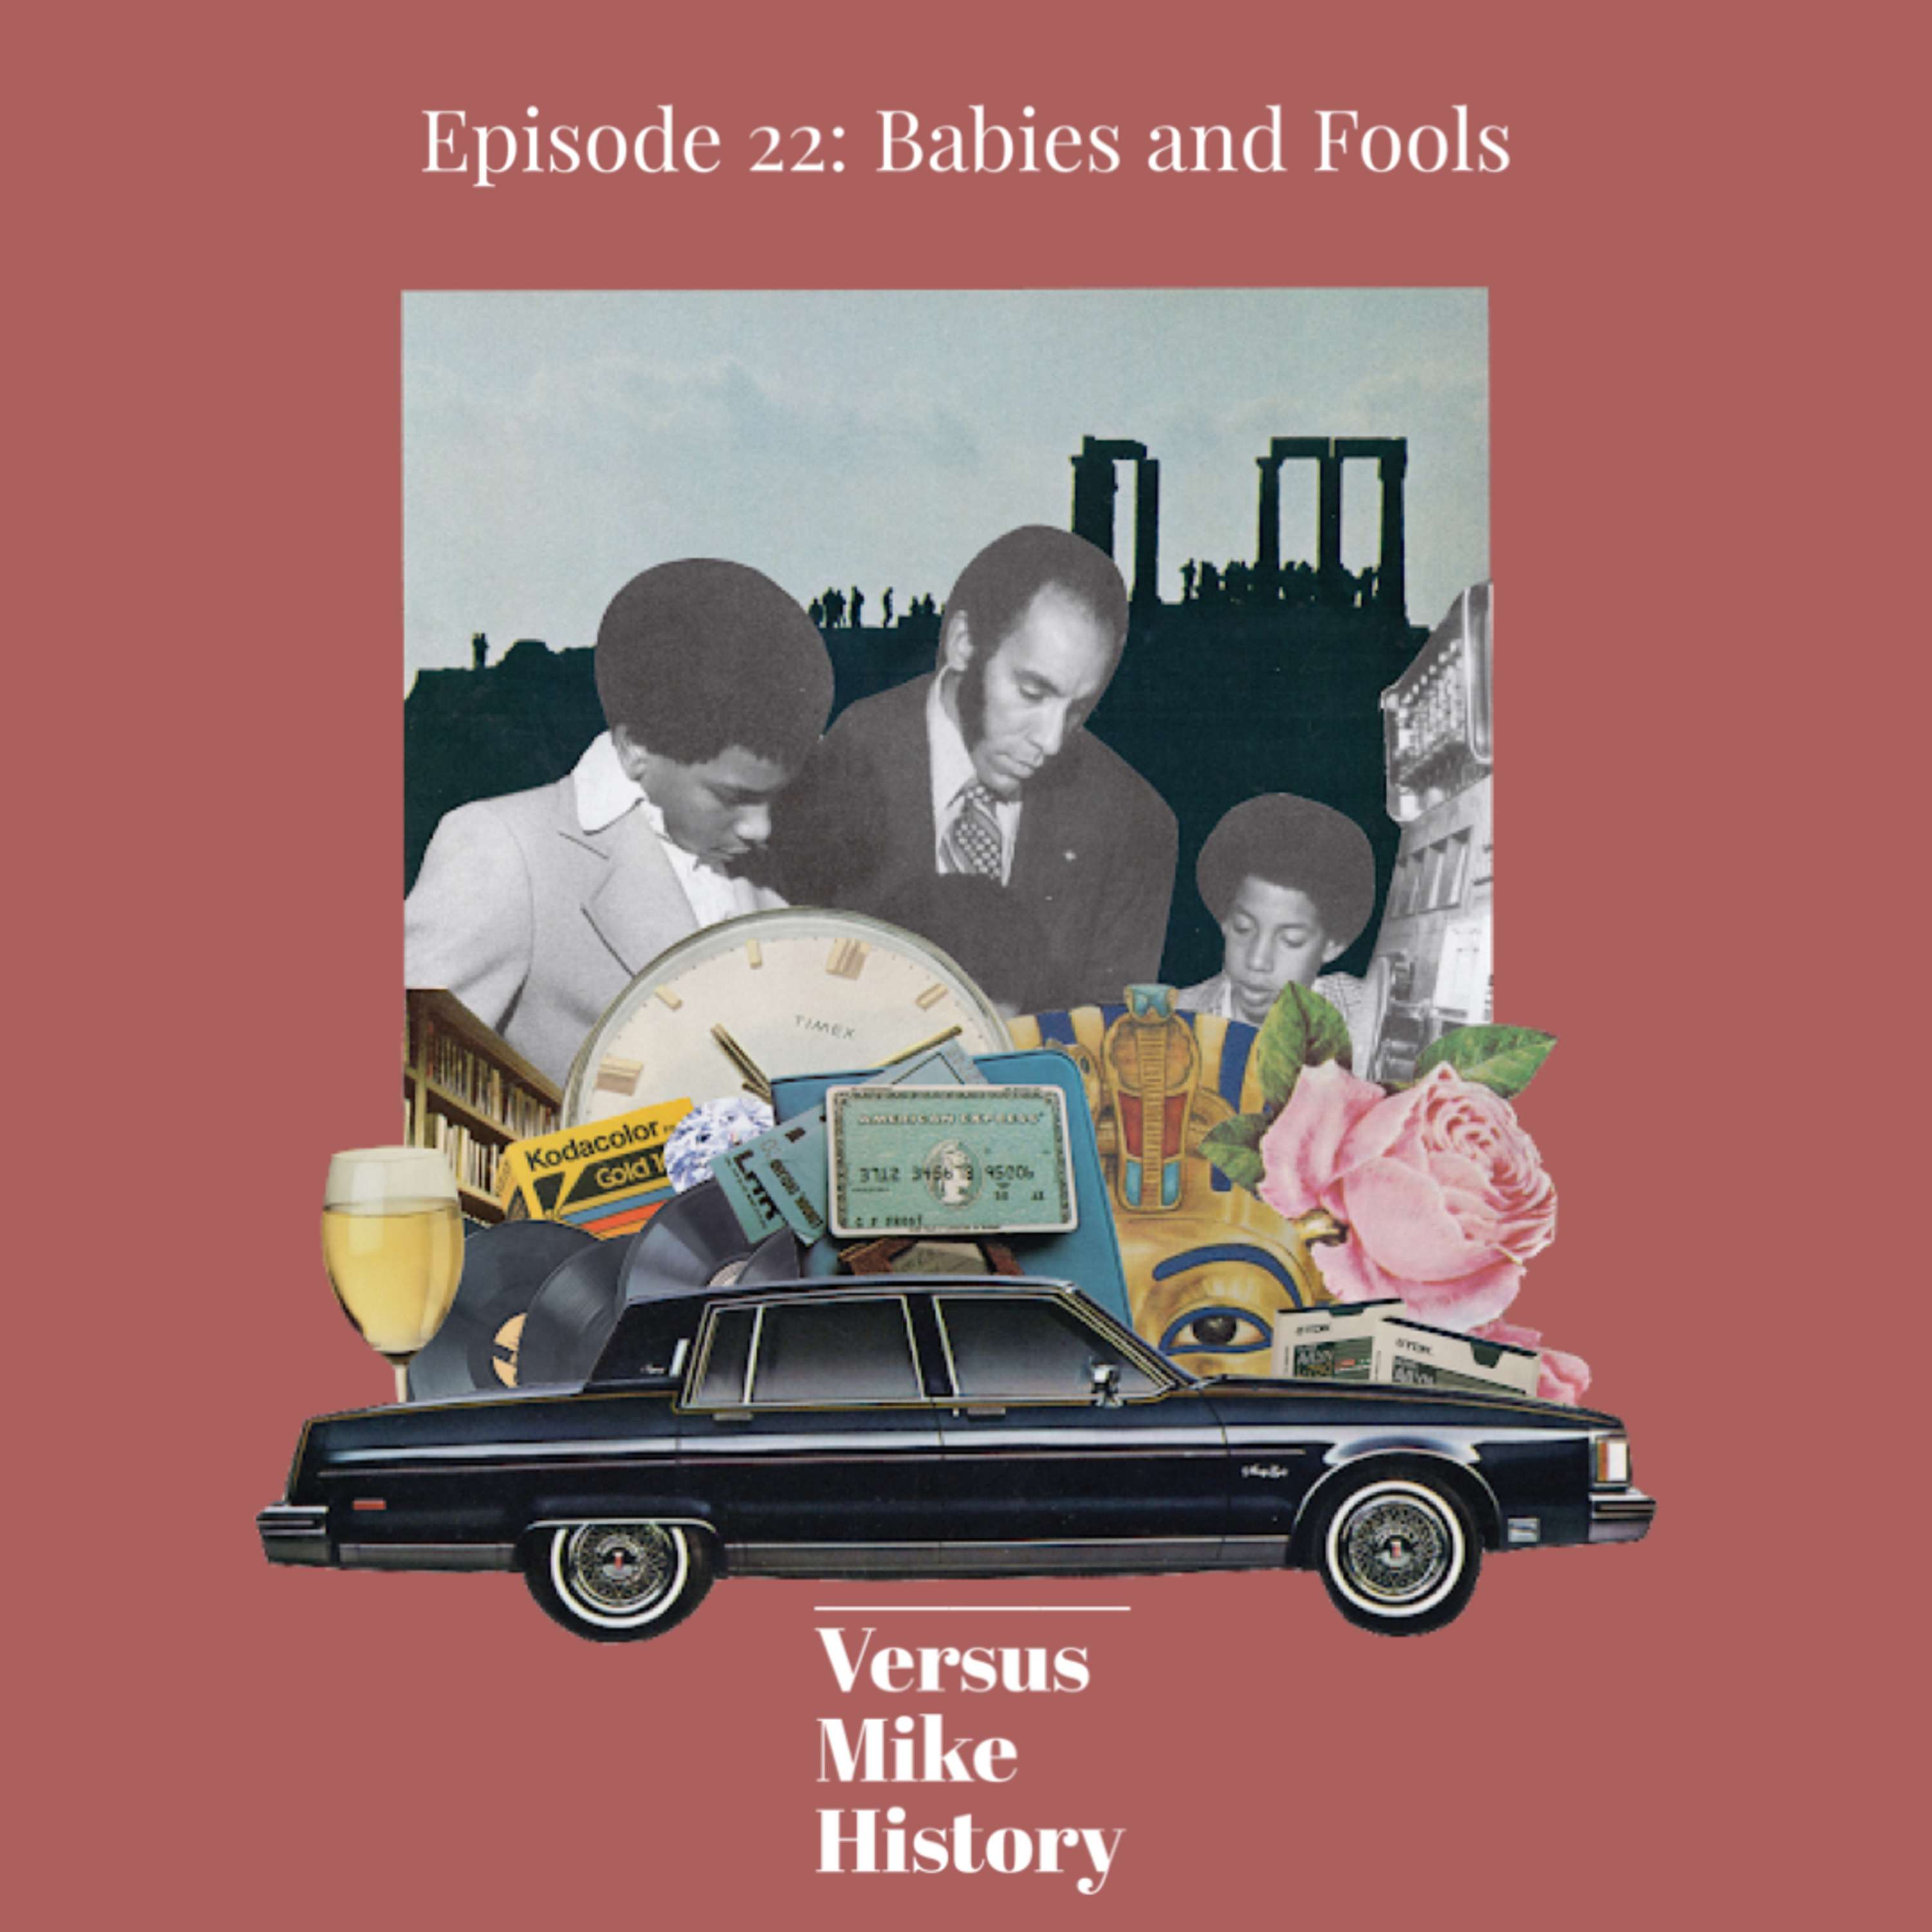 Episode 22: Babies and Fools